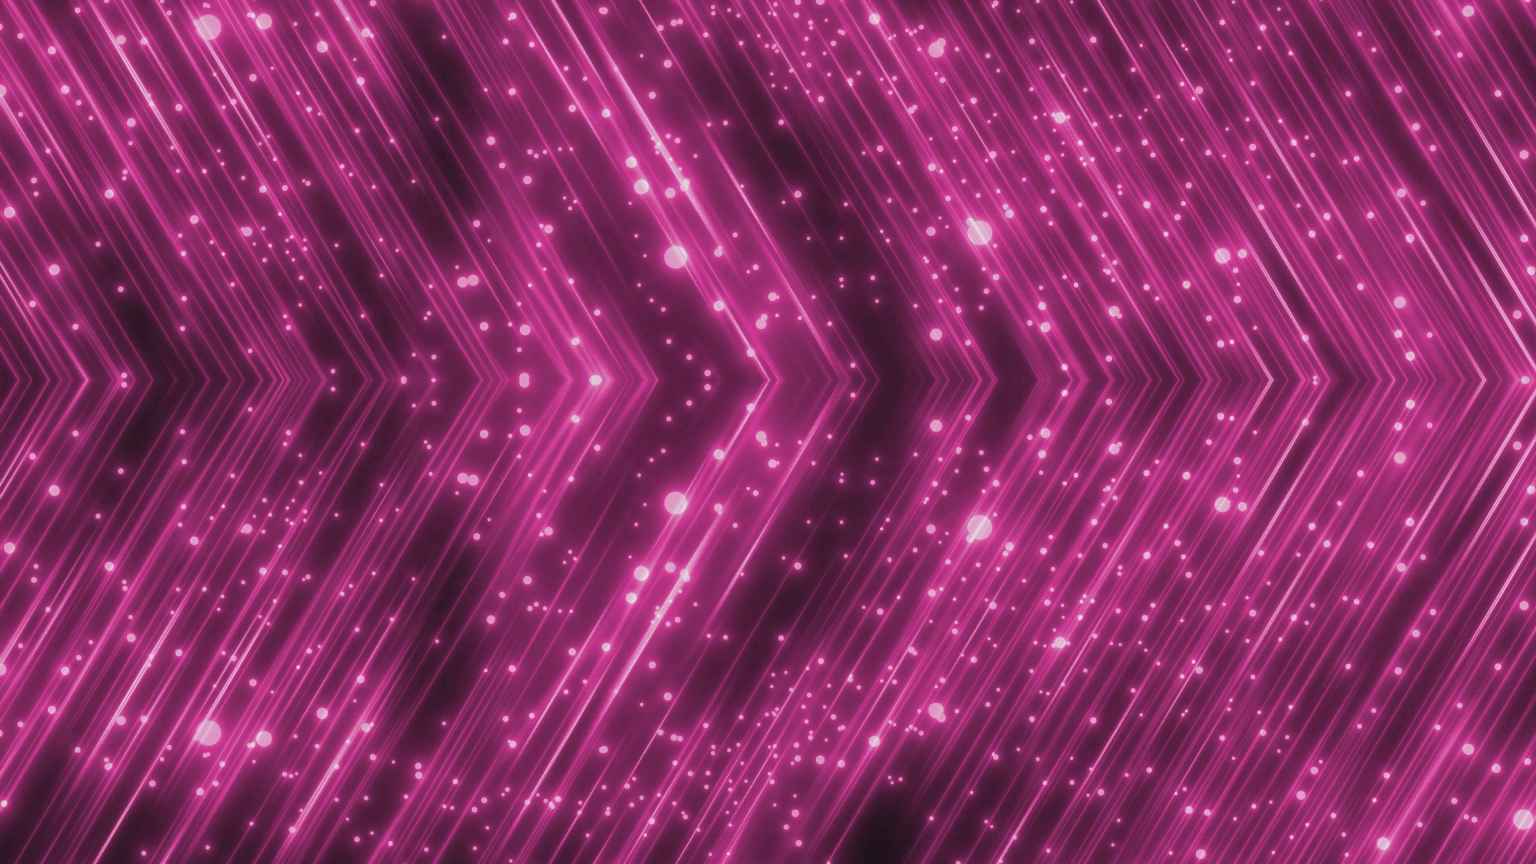 4K Glowing Pink Particles Looped Motion Background || VFX Free To Use 4K Screensaver